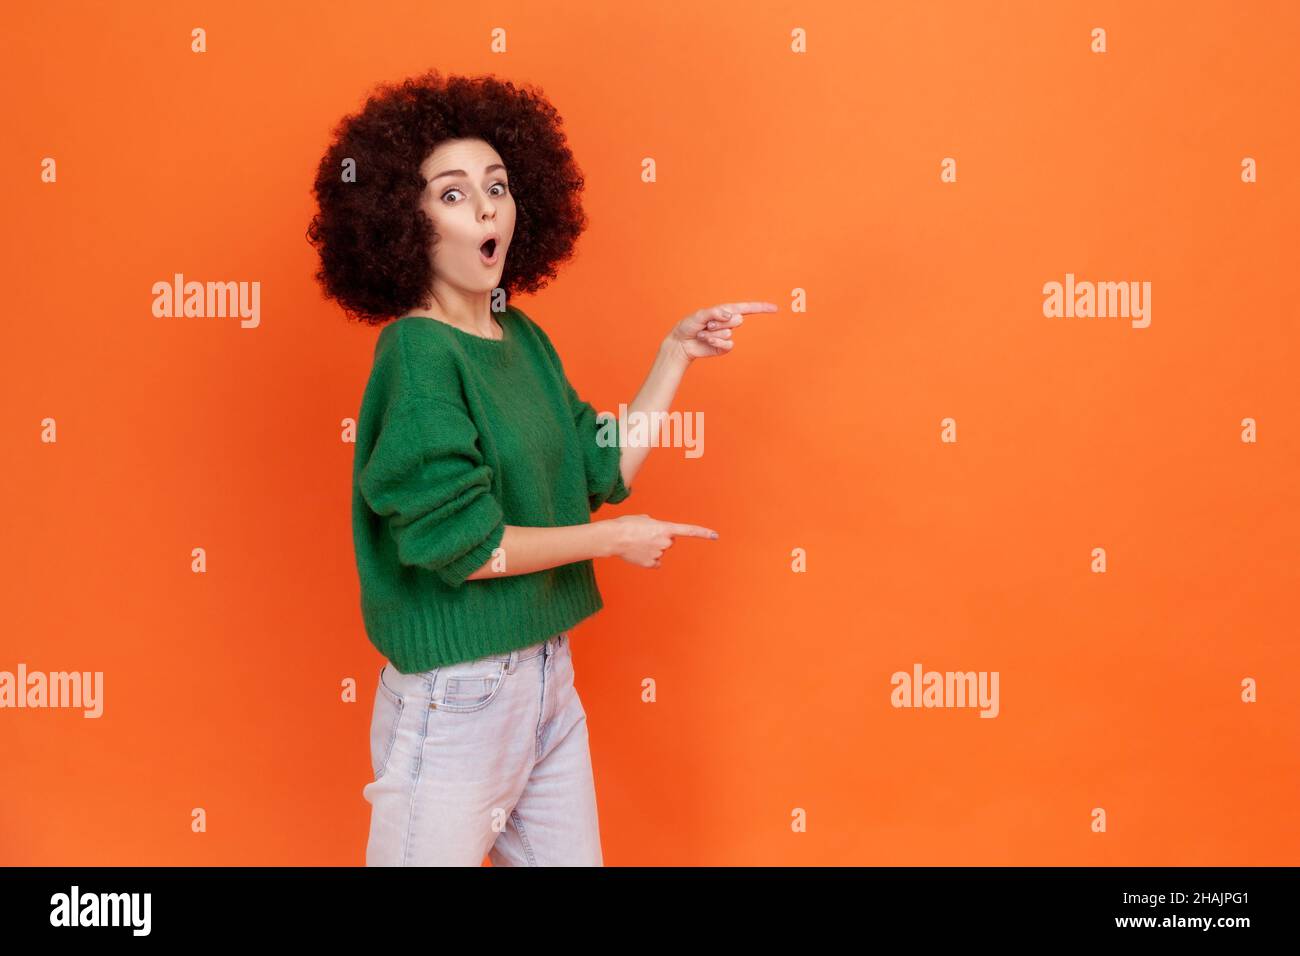 Astonished woman with Afro hairstyle in green sweater pointing aside with finger, having surprised facial expression, keeps mouth open, copy space. Indoor studio shot isolated on orange background. Stock Photo